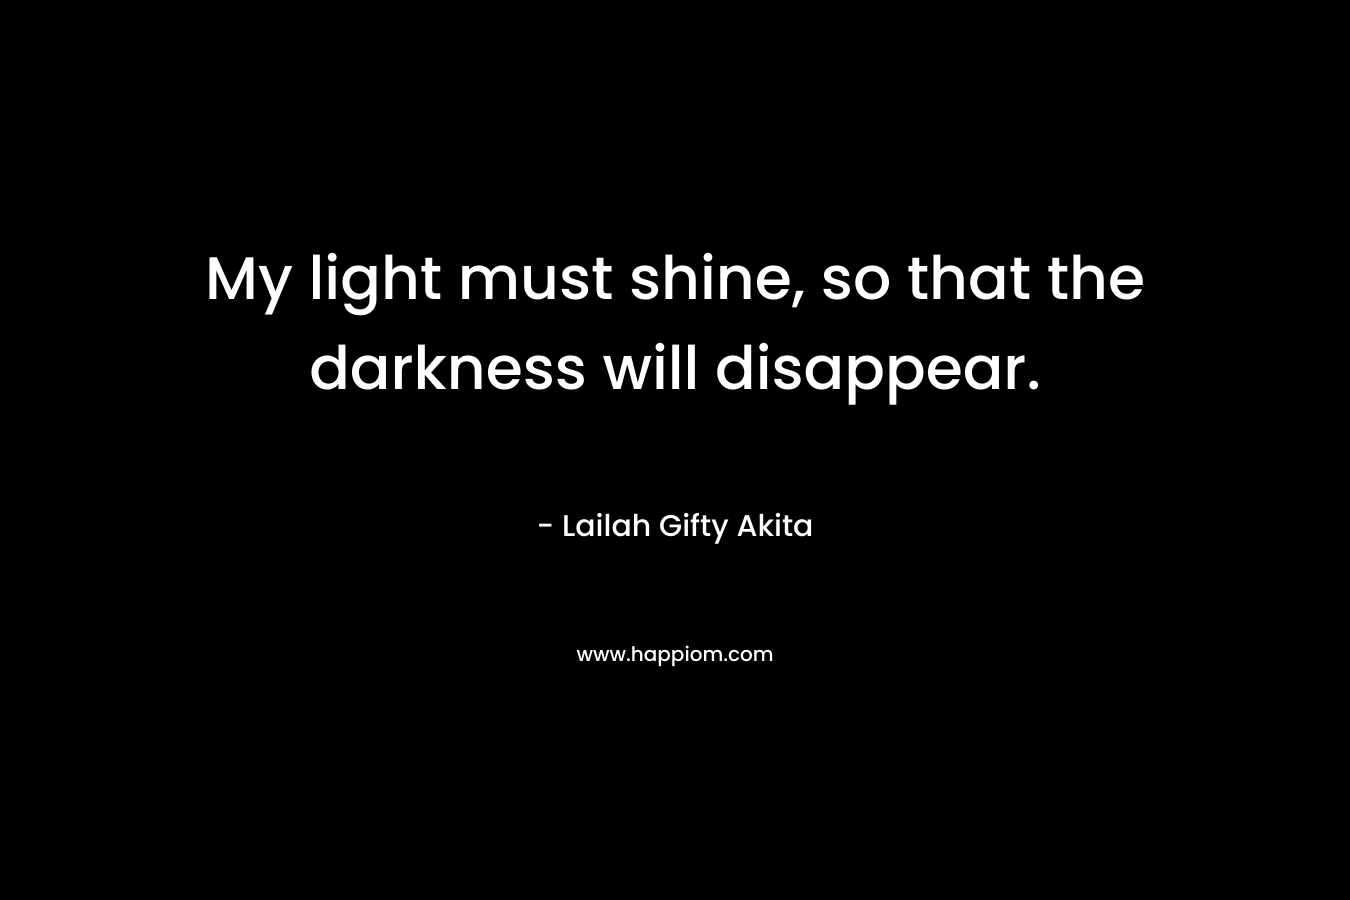 My light must shine, so that the darkness will disappear.